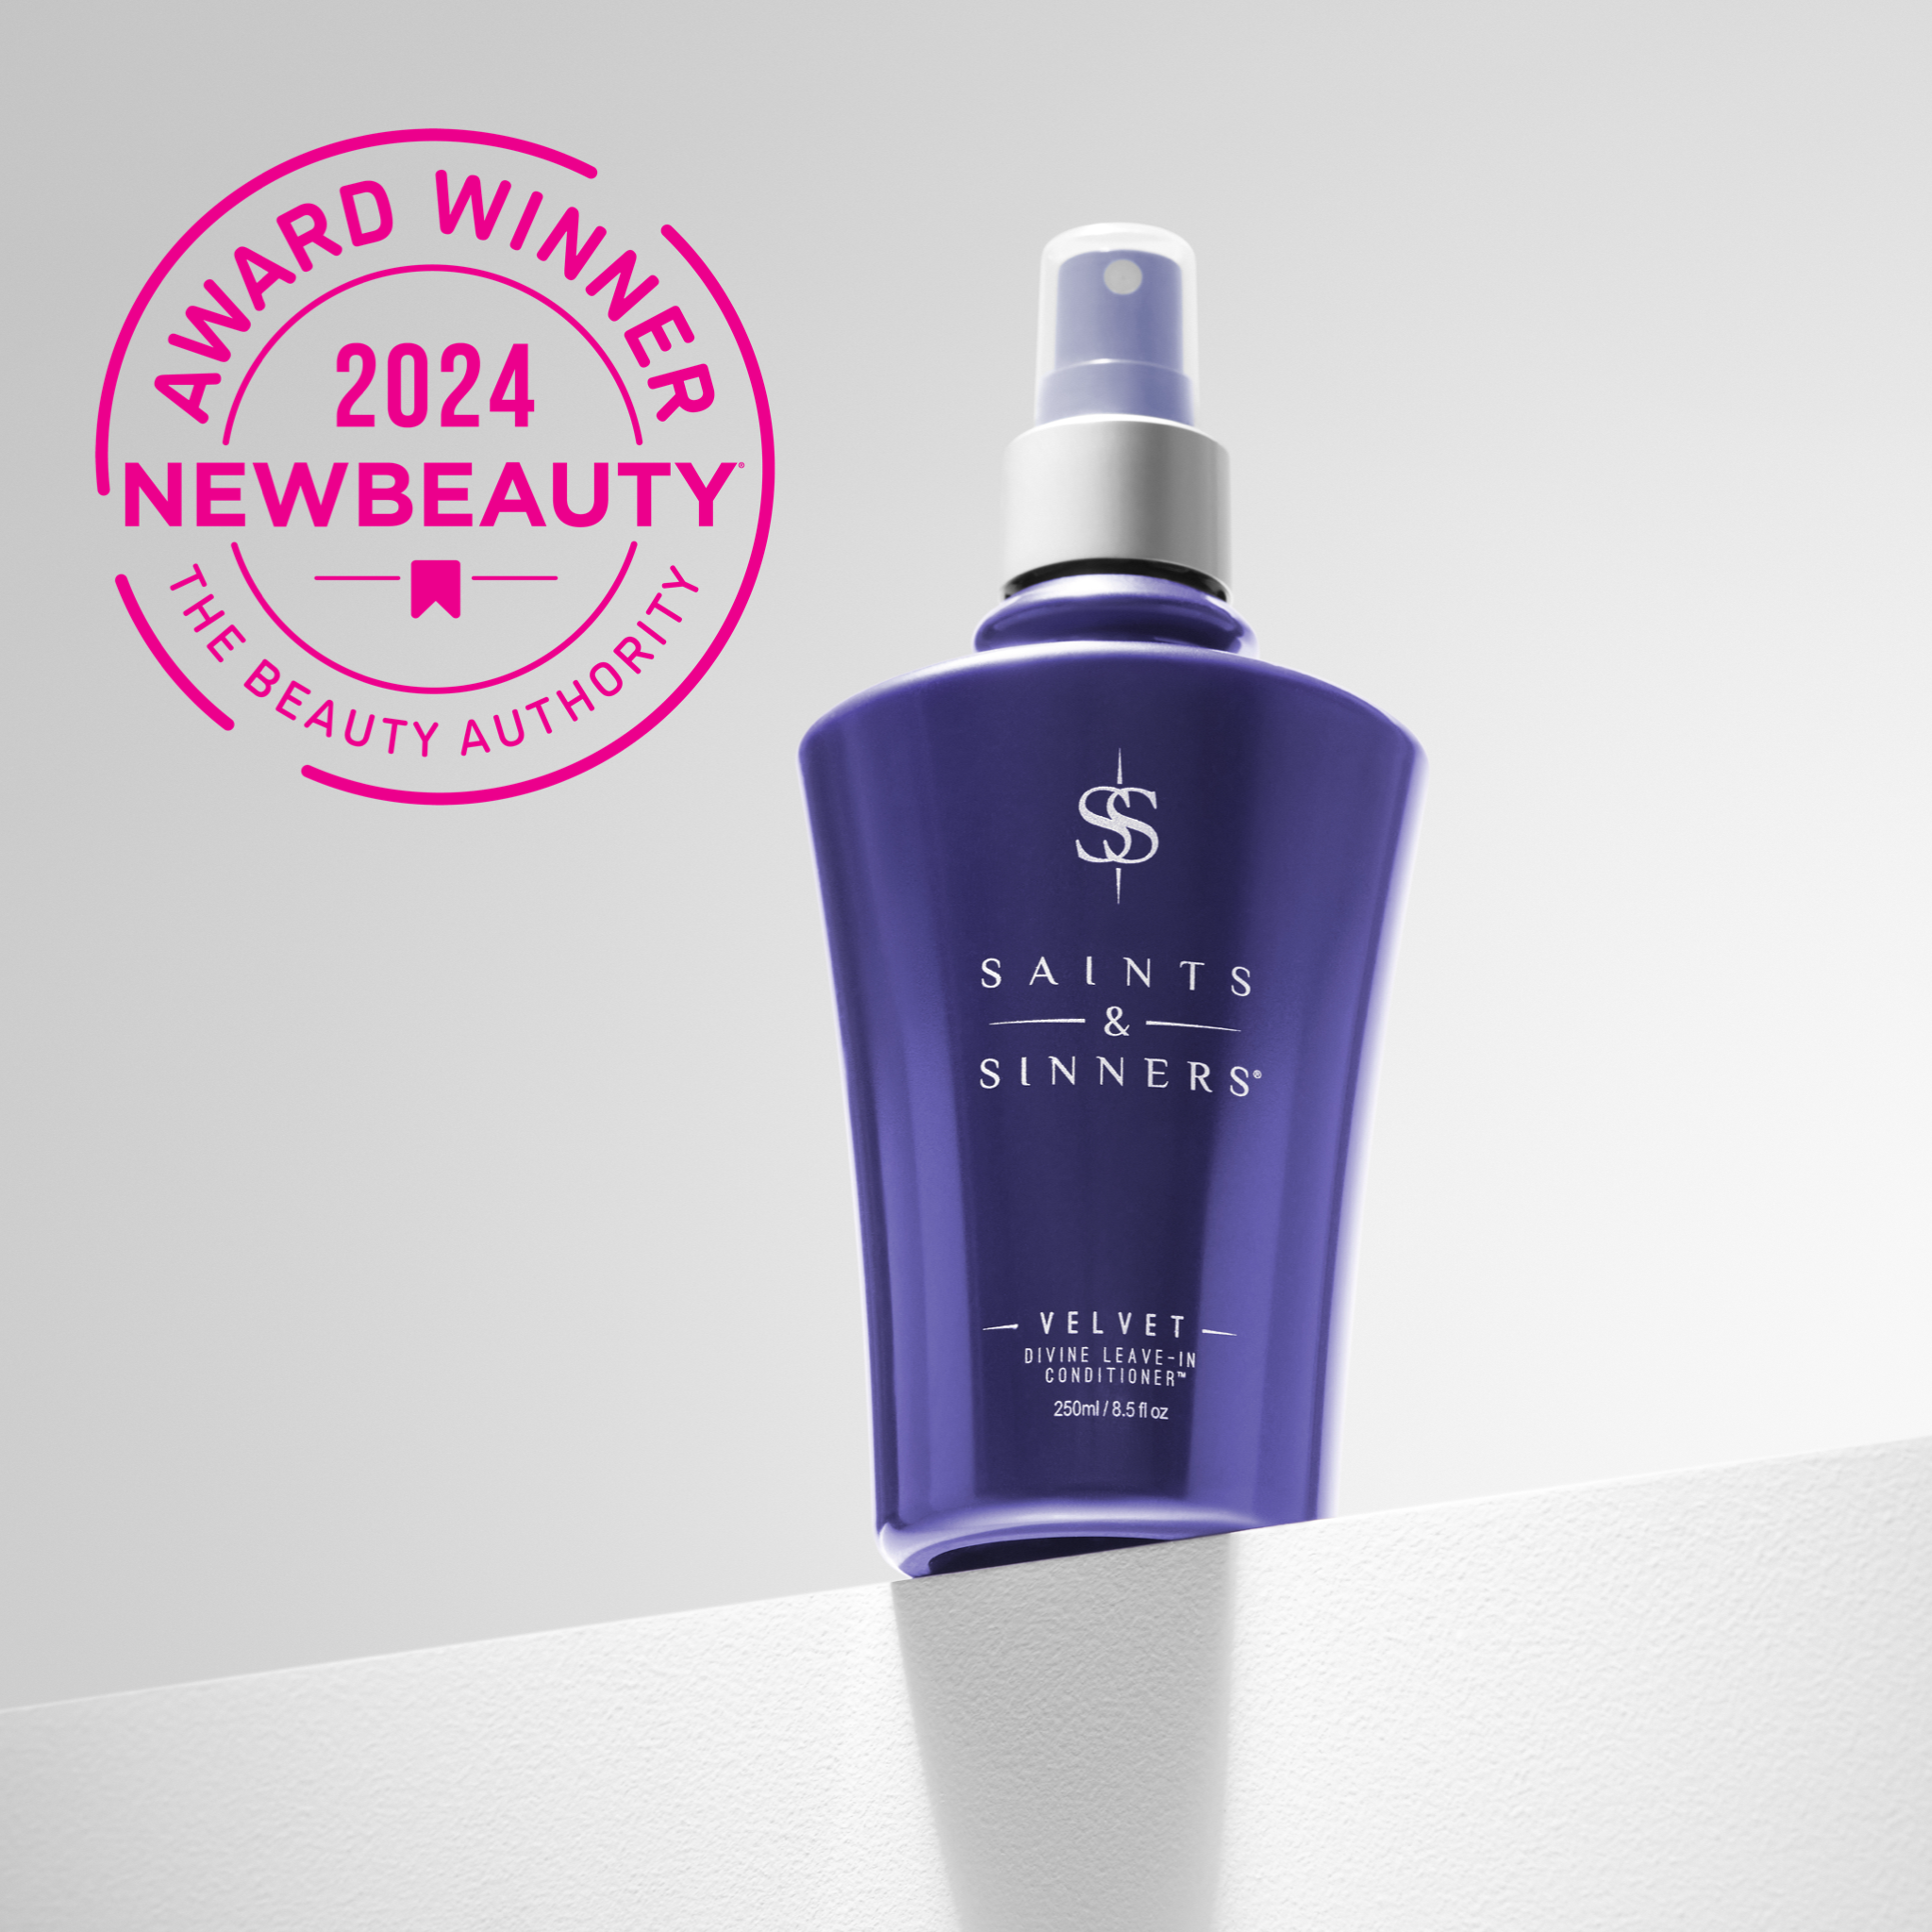 2024 NewBeauty Magazine  Best Leave-In Conditioner  Velvet Divine Leave-In Conditioner